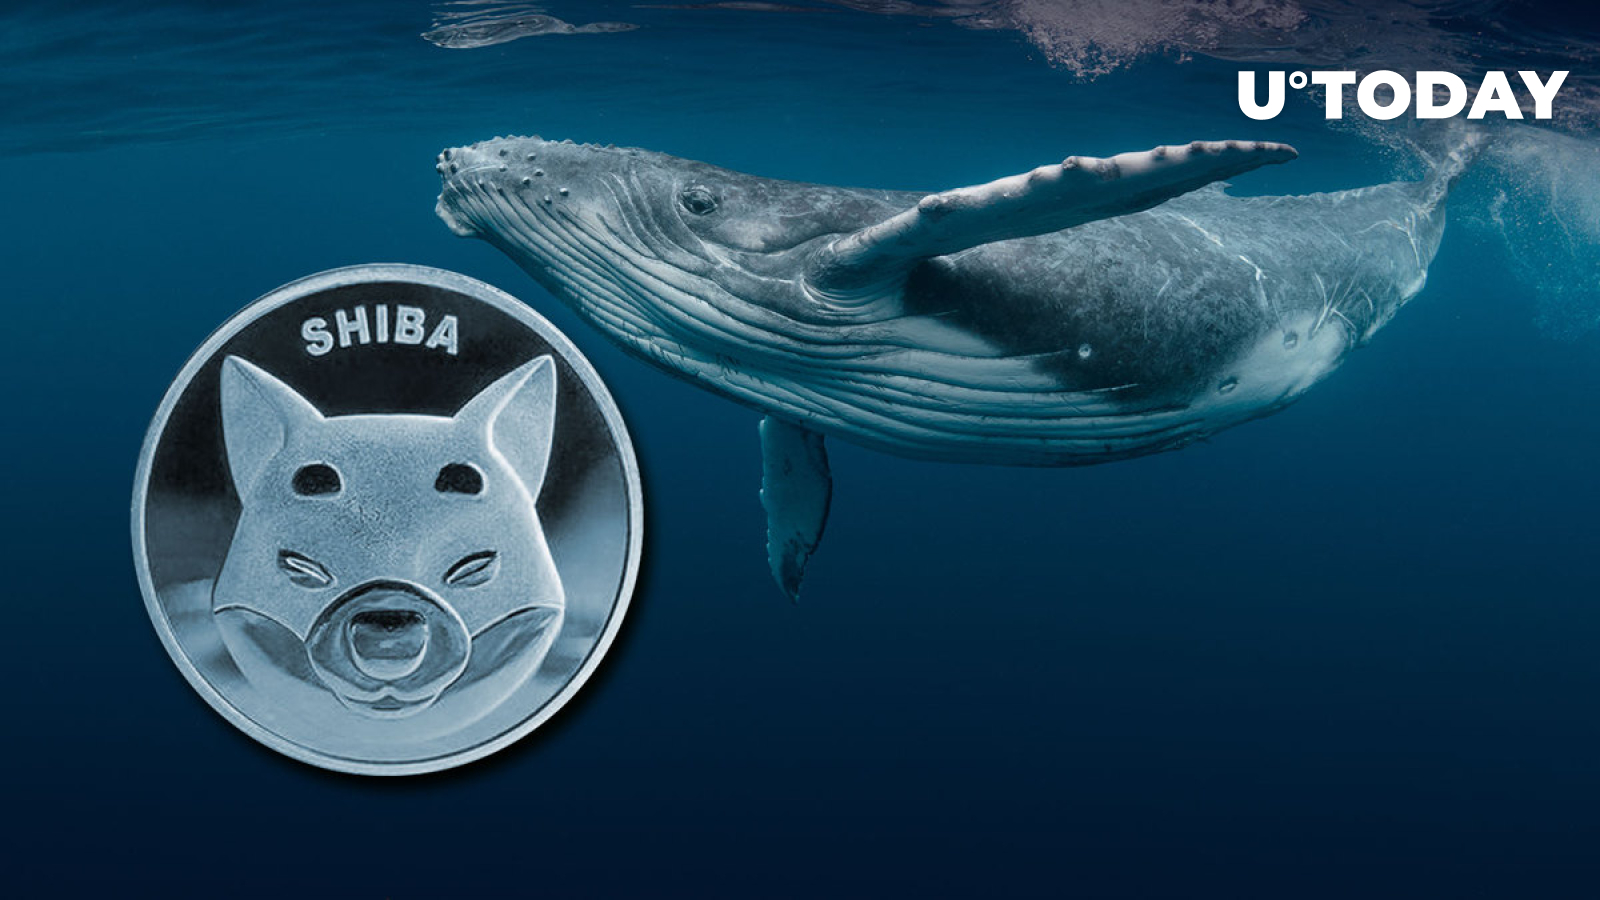 shib-trading-volume-up-102-as-whales-grab-323-billion-coins-in-24-hours